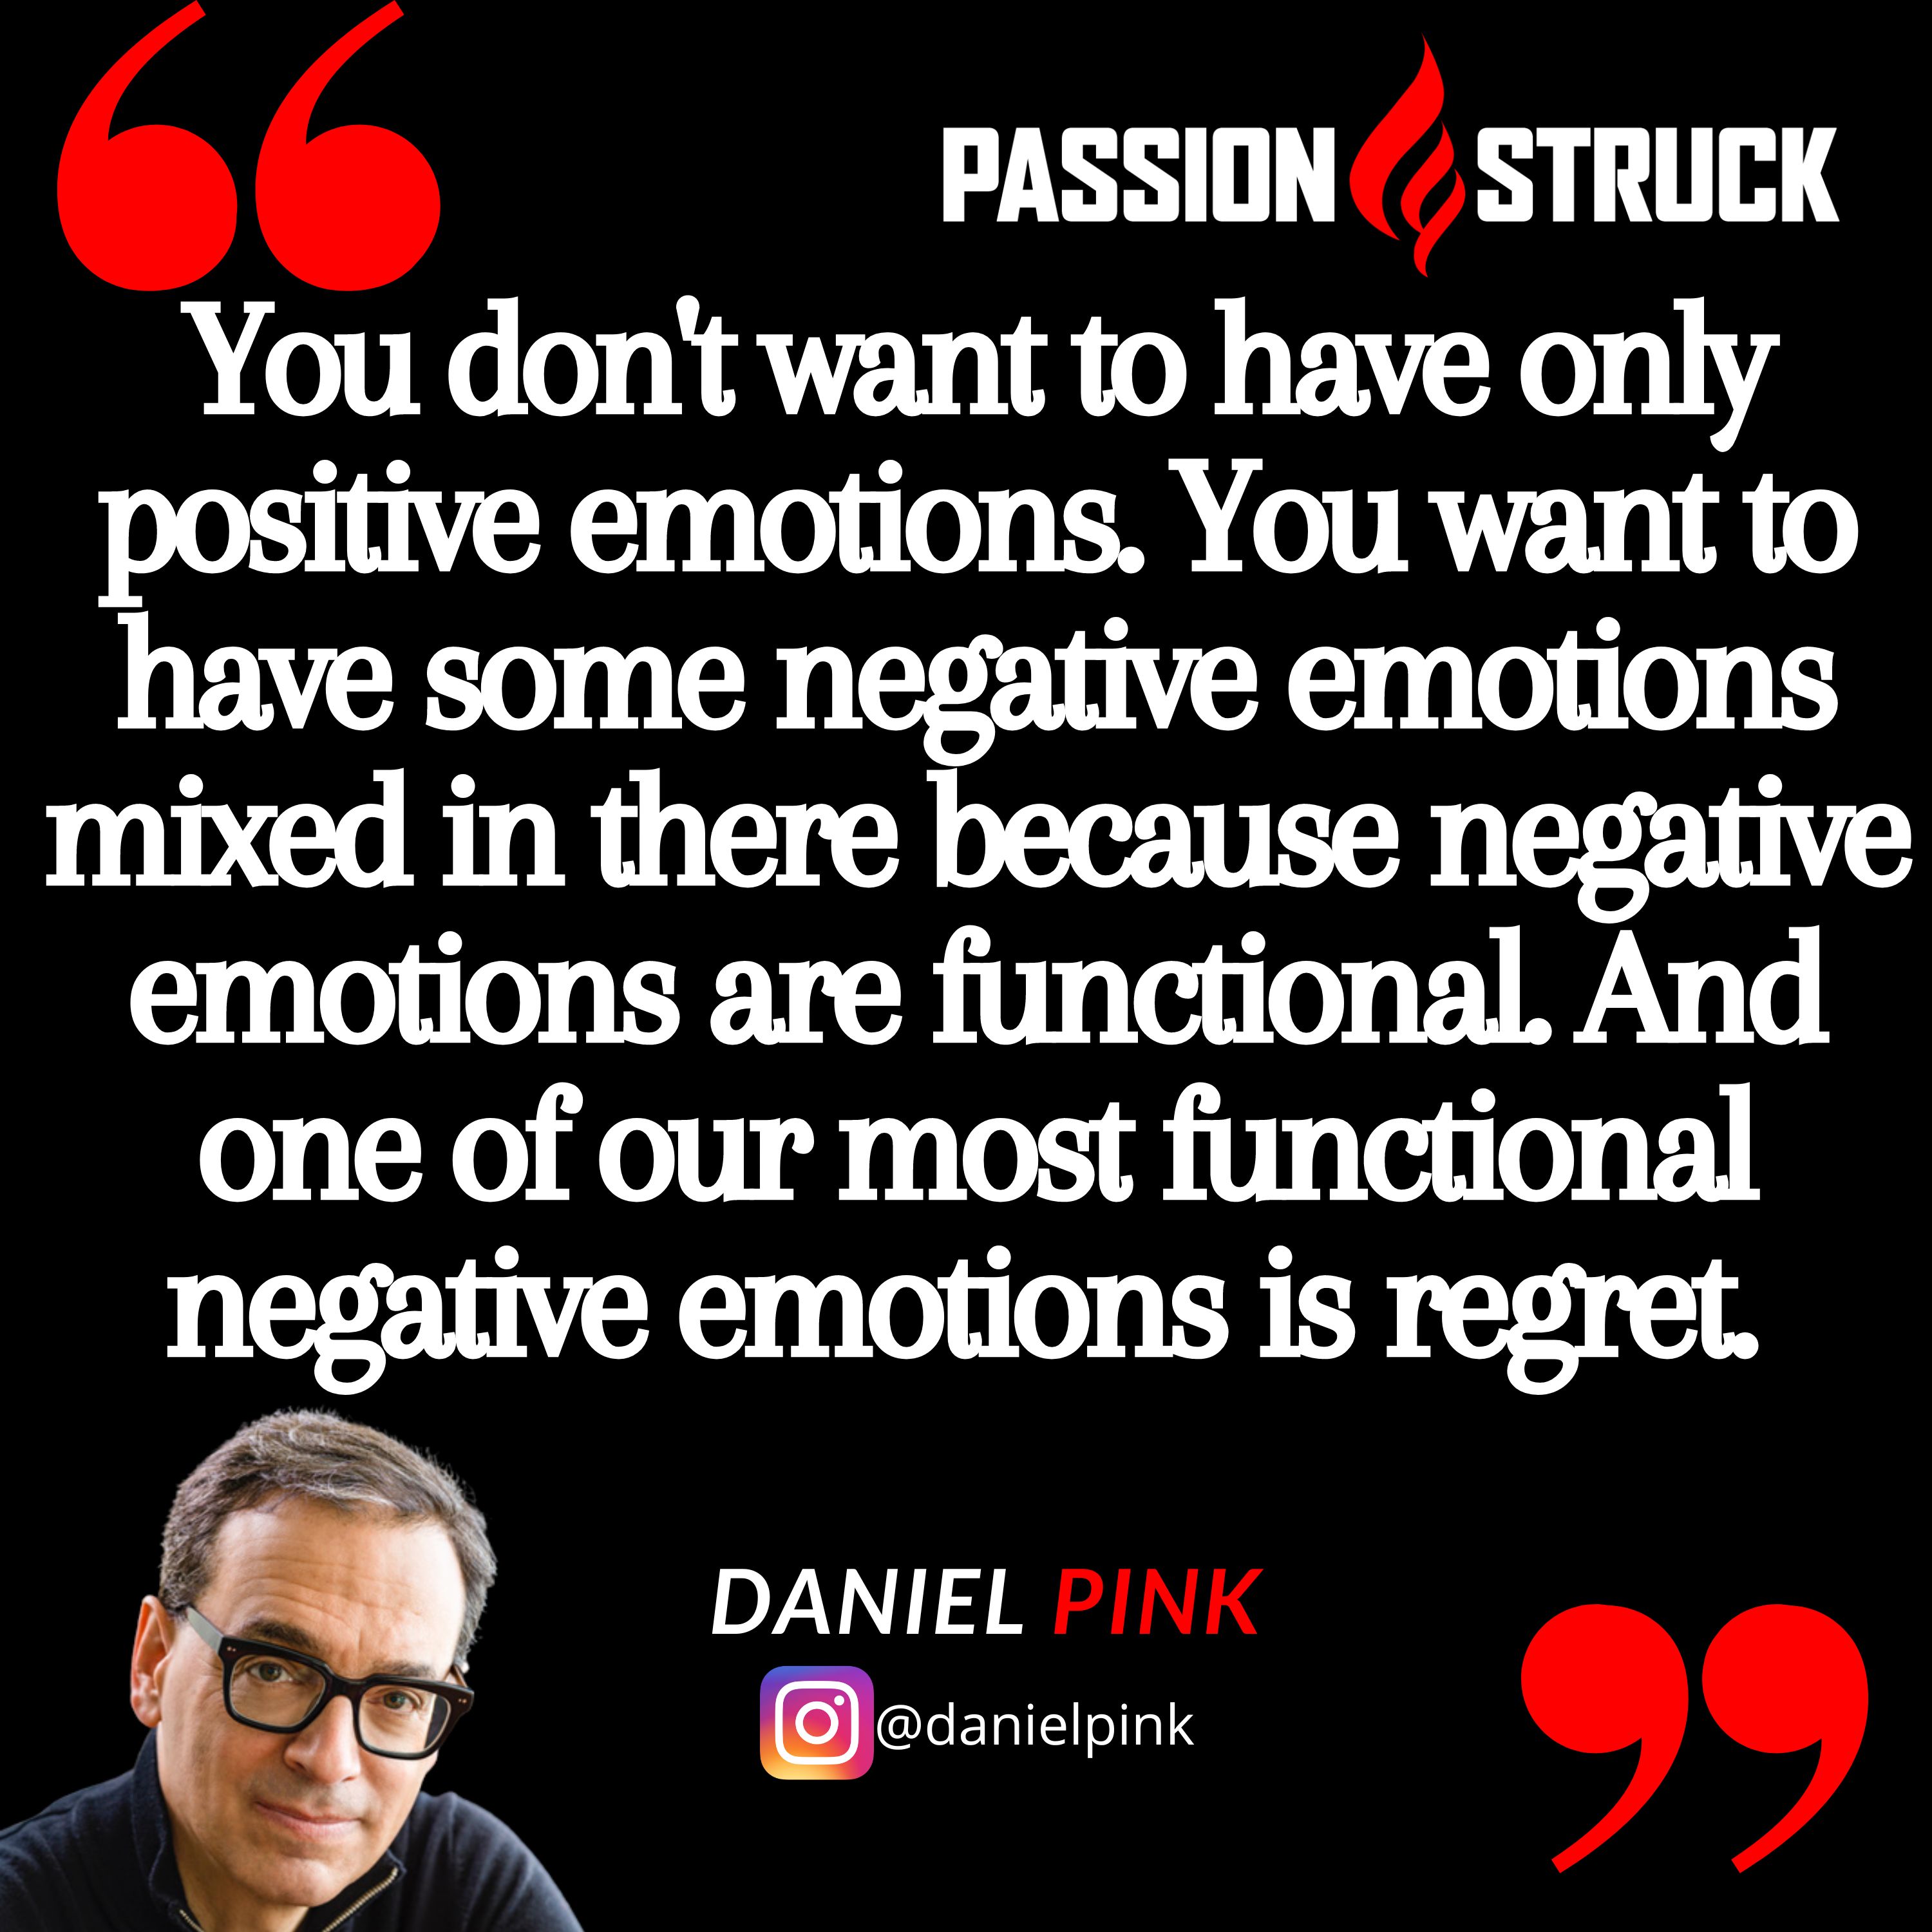 Daniel Pink quote from the passion struck podcast: You don't want to have only positive emotions. You want to have some negative emotions mixed in there because negative emotions are functional. And one of our most functional negative emotions is regret. 